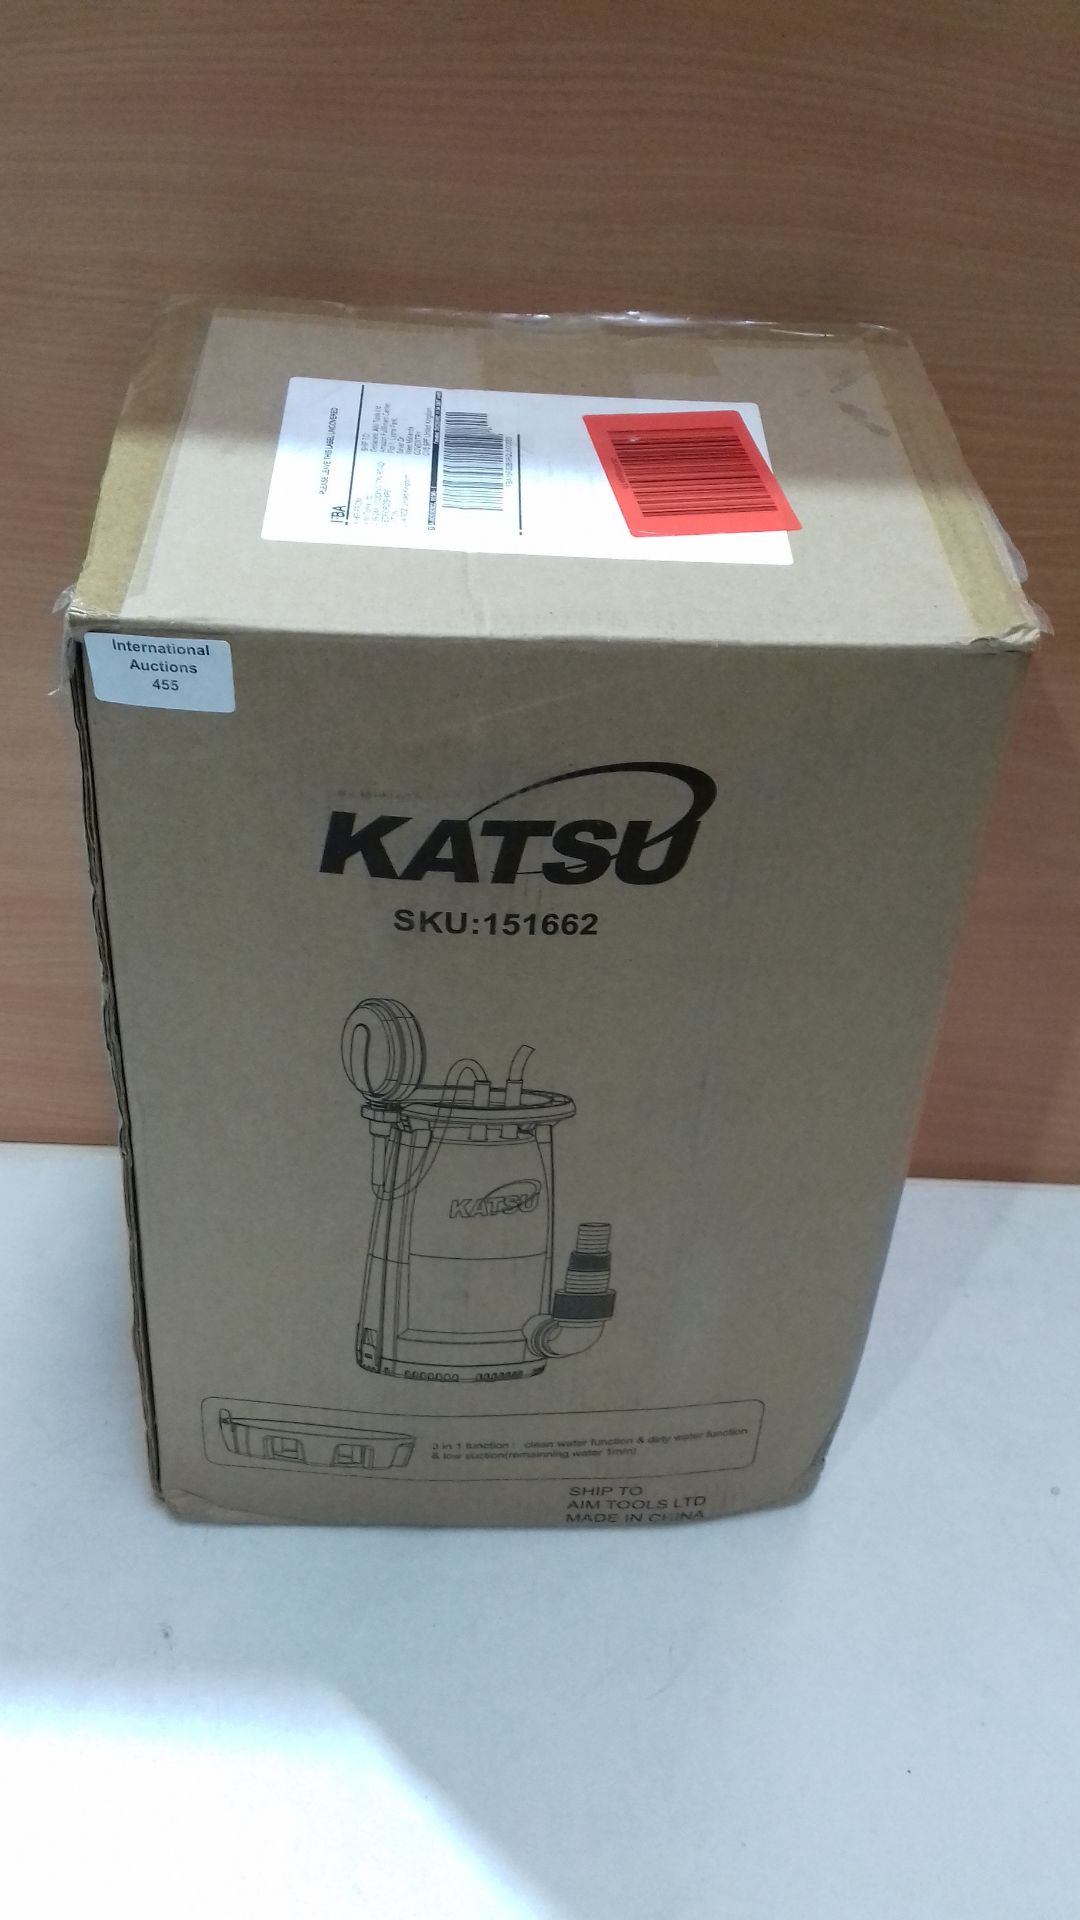 RRP £36.31 KATSU 400W Professional Submersible Pump for Clean - Image 2 of 2